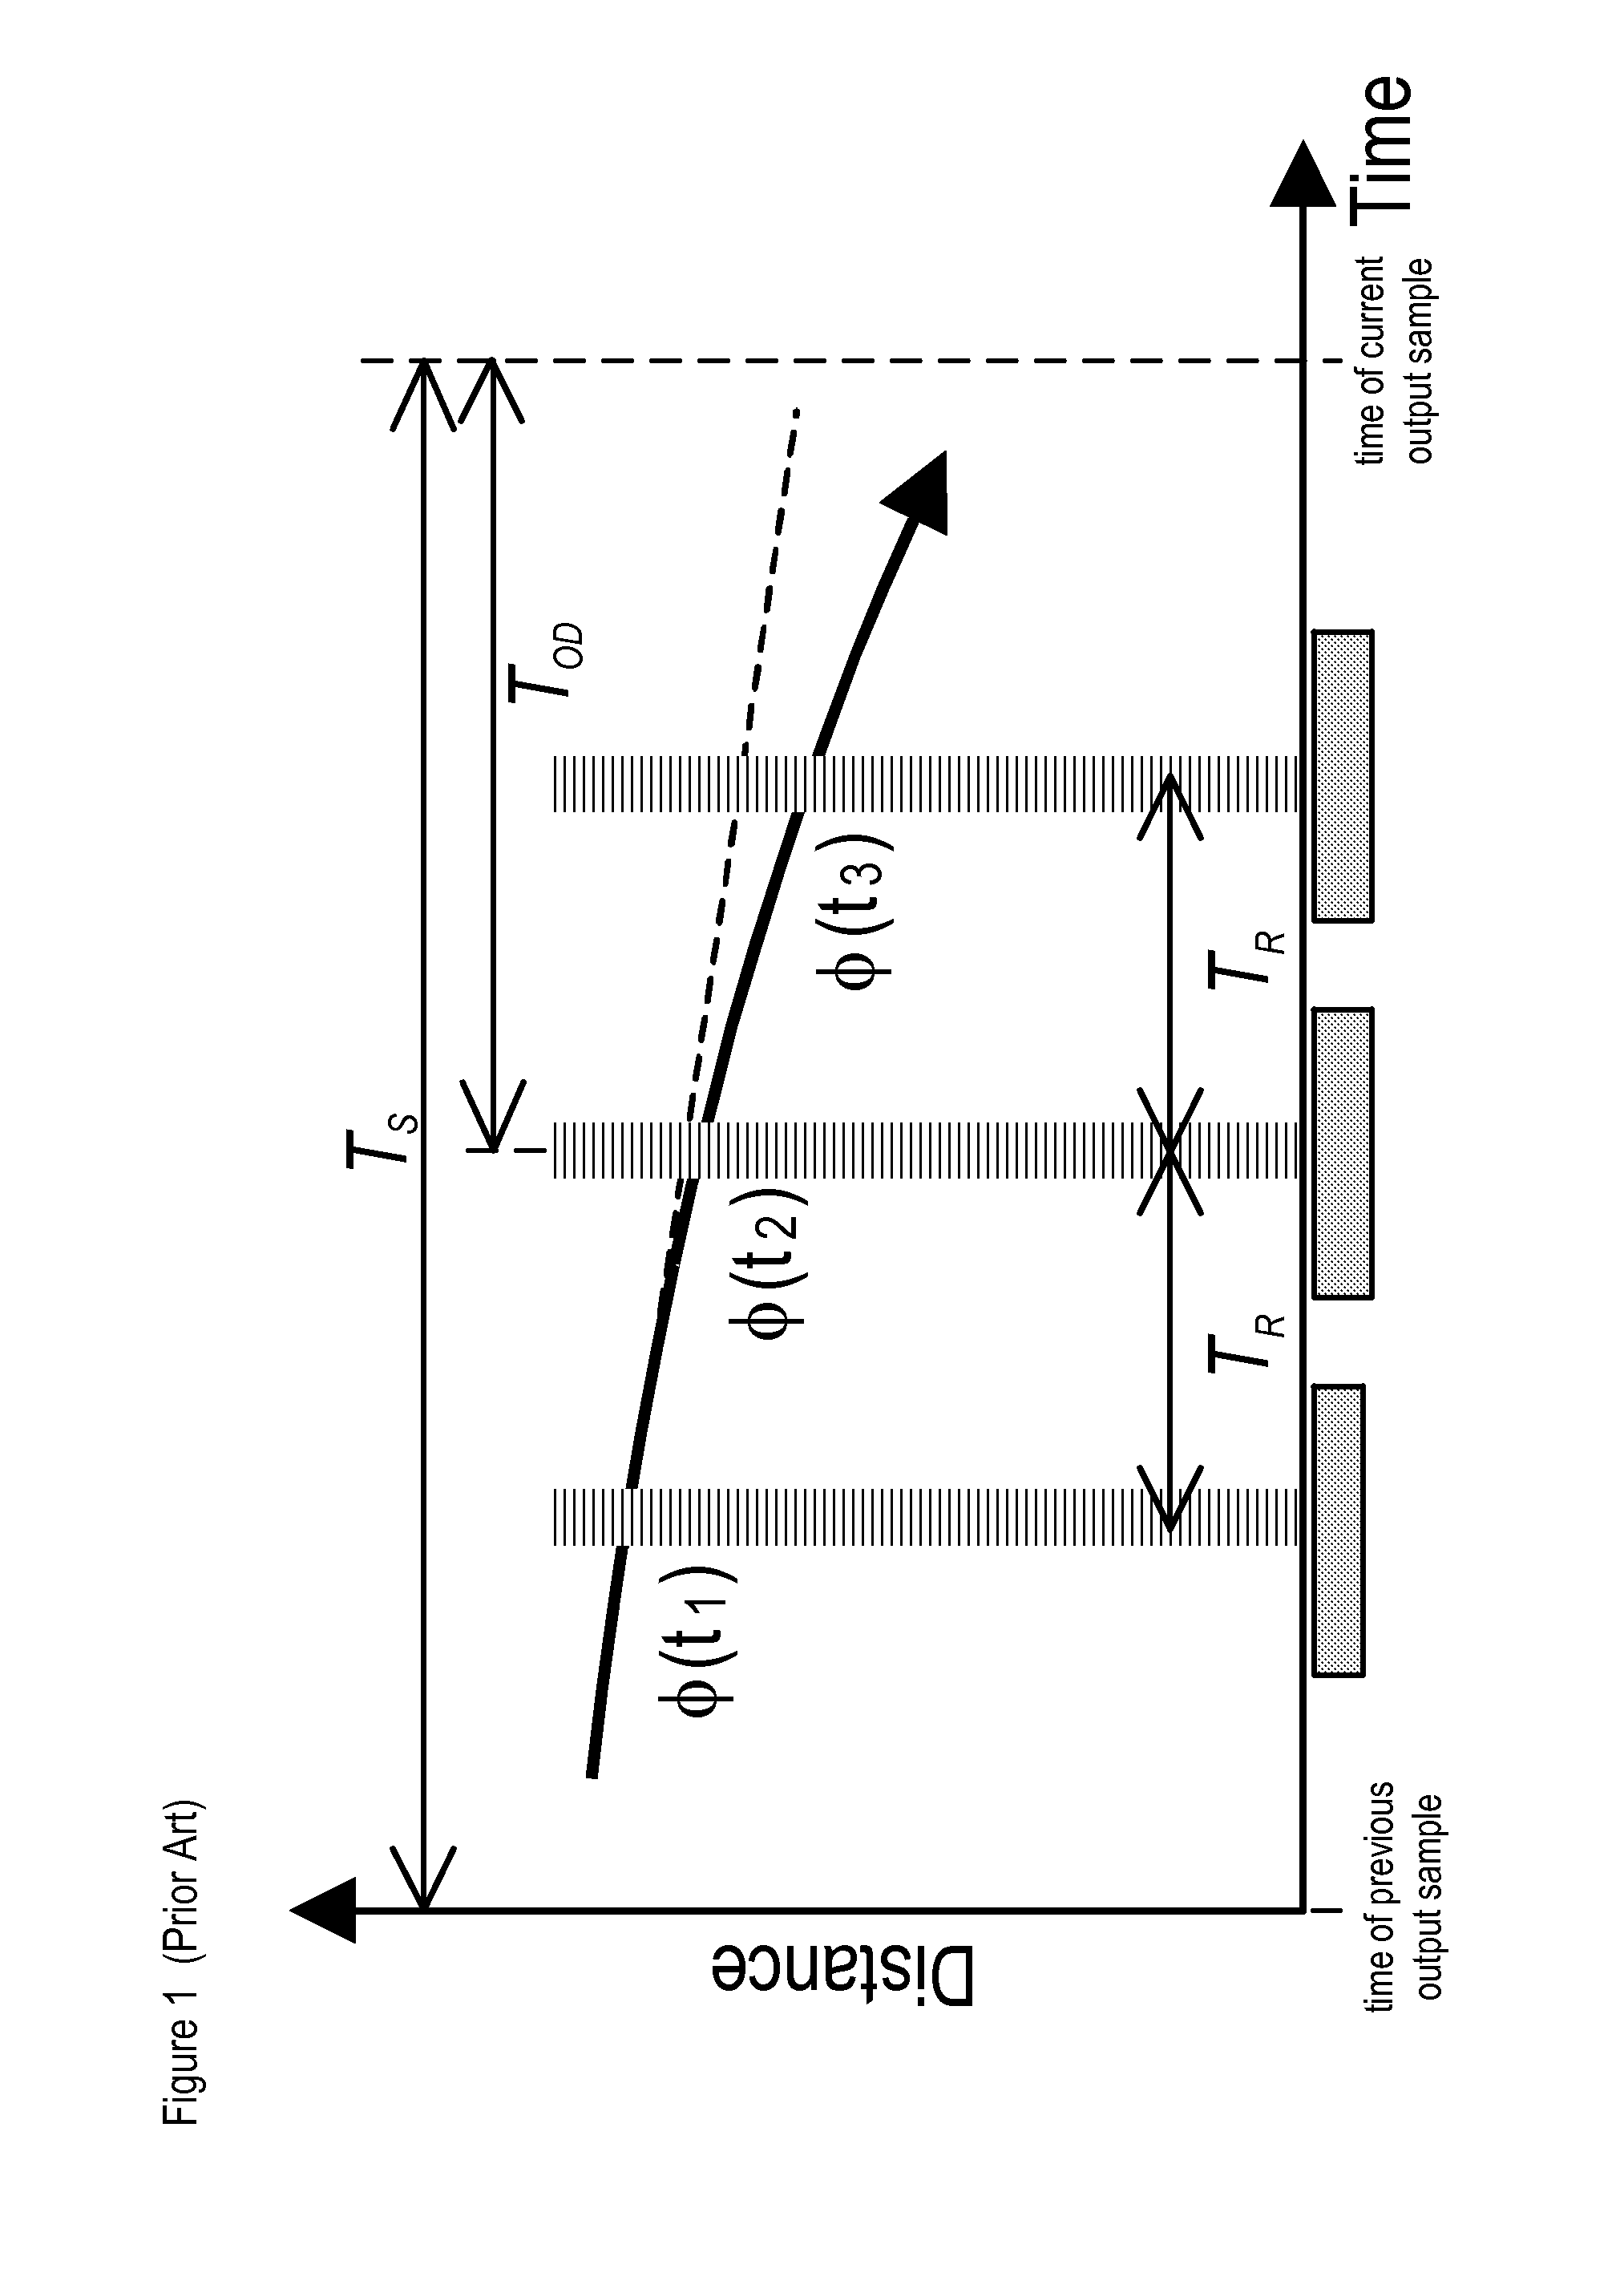 Performance of an Atom Interferometric Device through Complementary Filtering